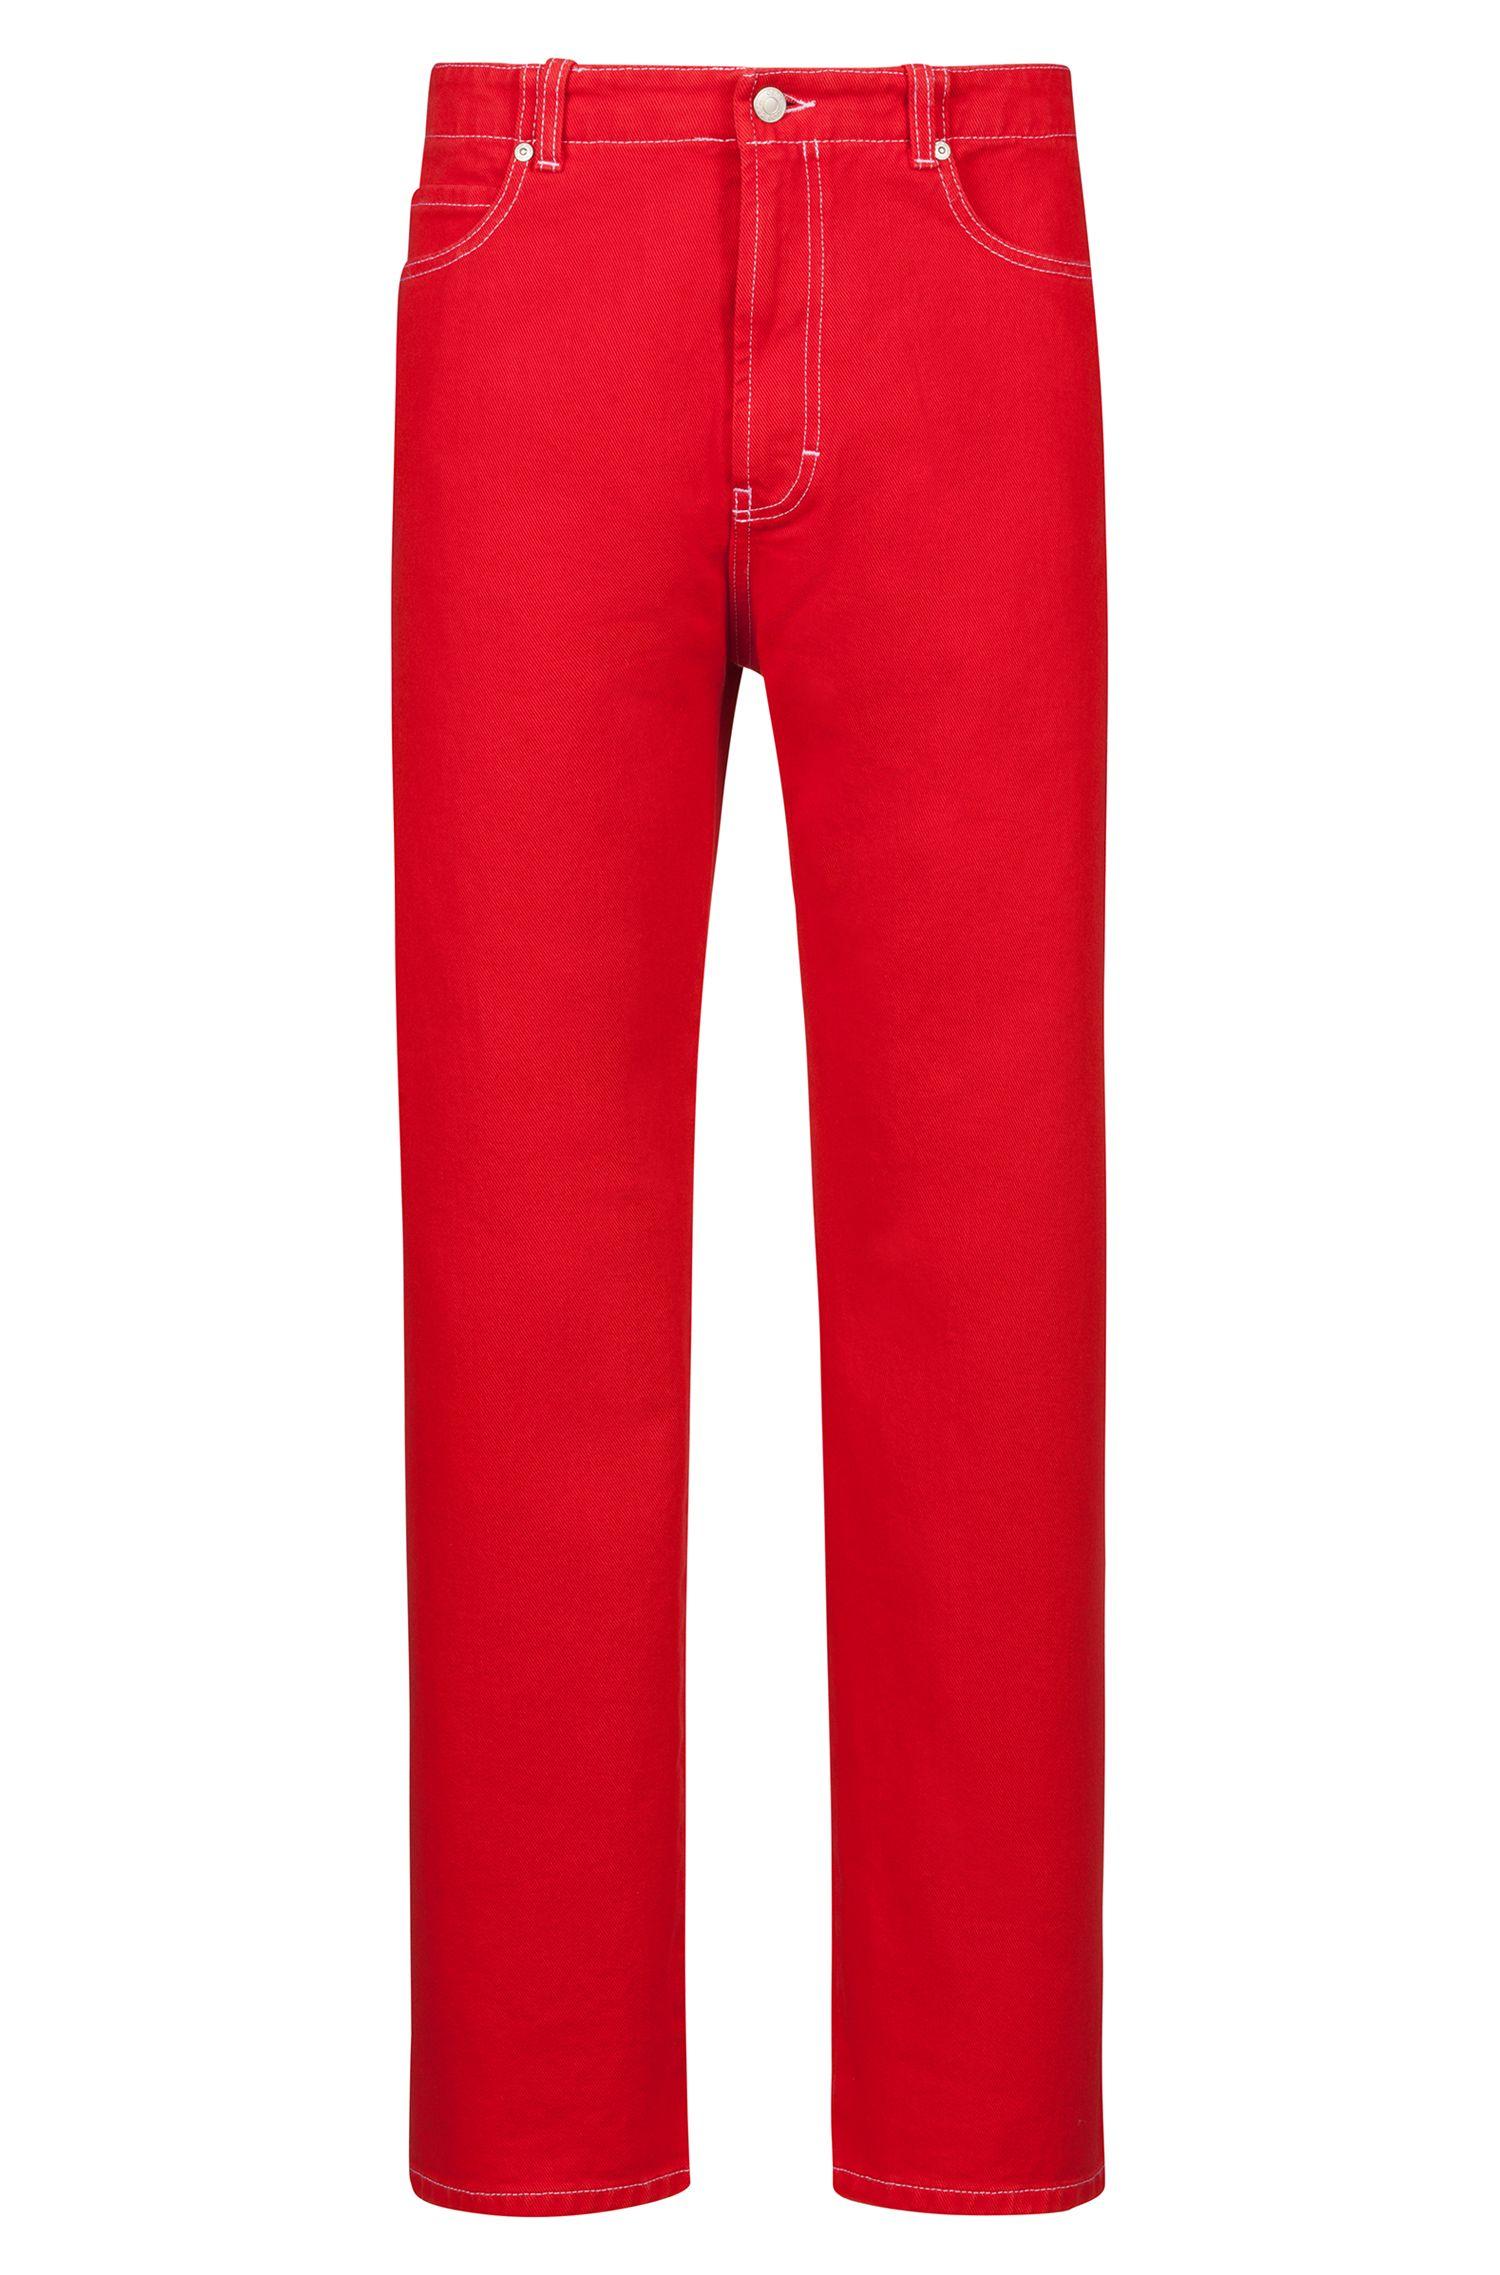 HUGO Relaxed-fit Jeans In Overdyed Denim With Turn-ups in Red for Men ...